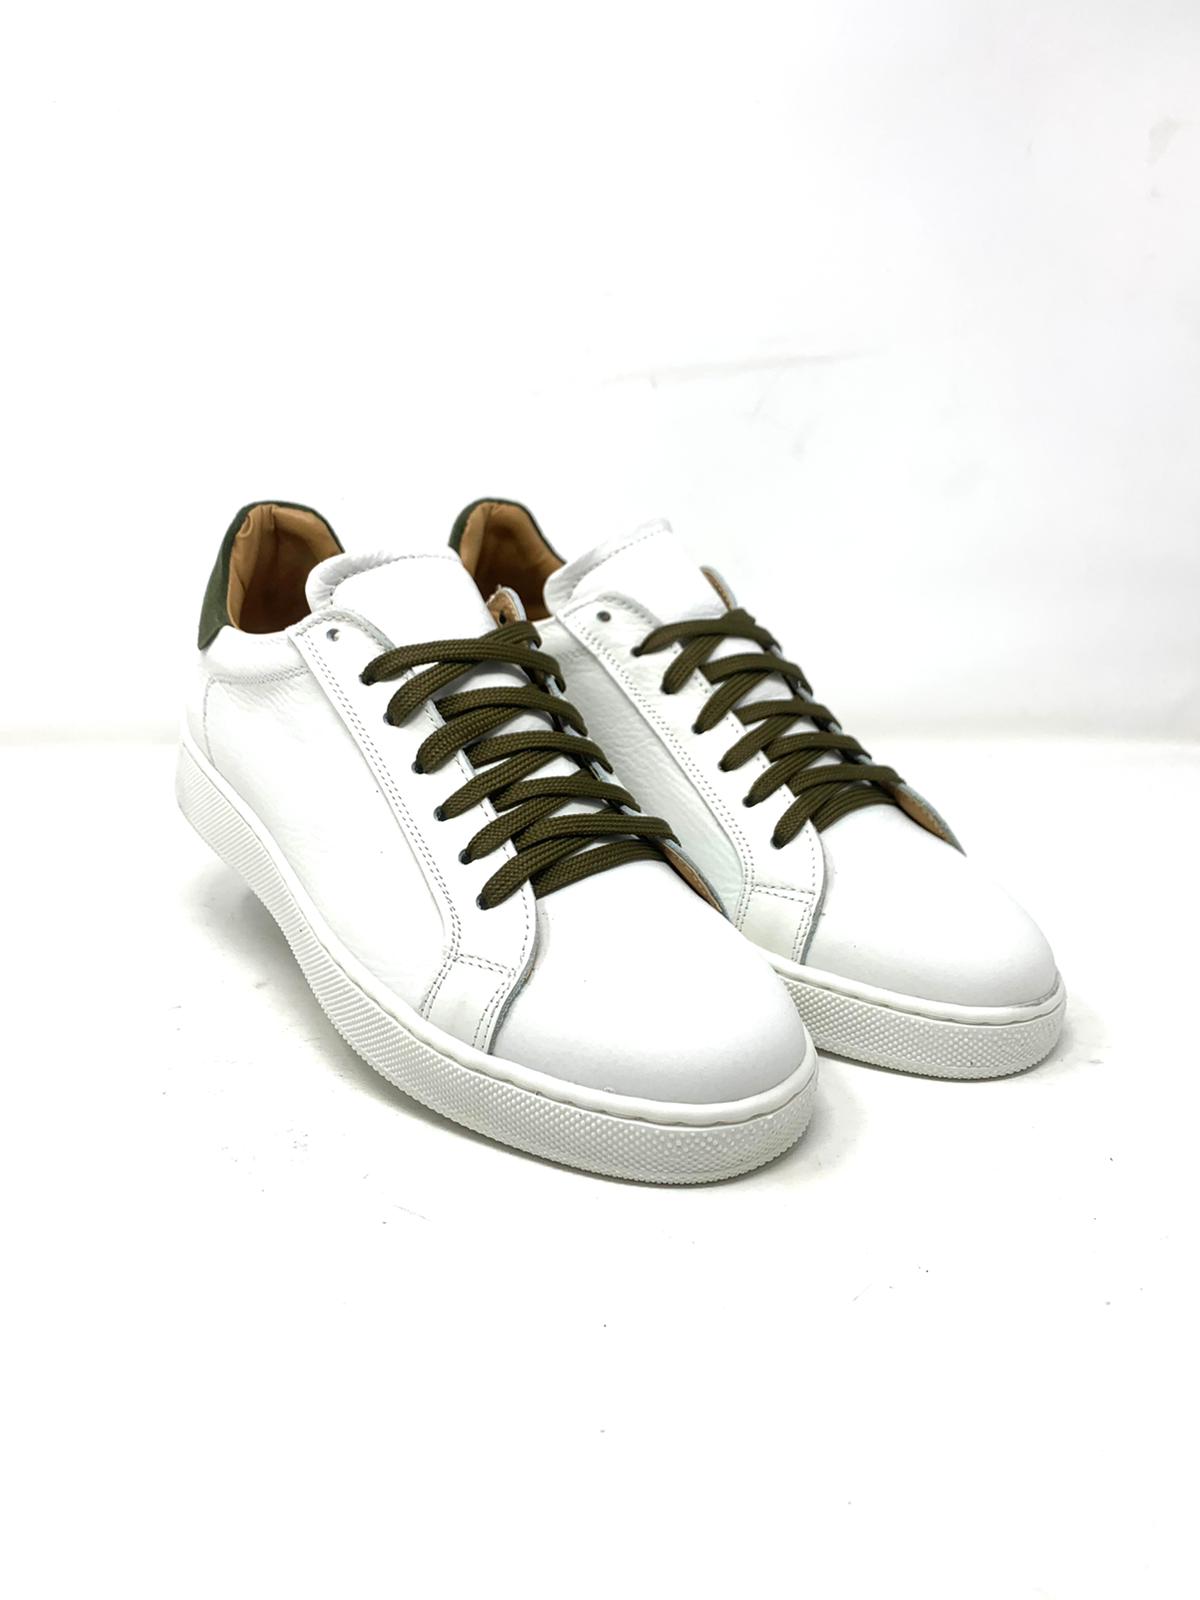 Sneakers vera pelle bottalata MADE IN ITALY